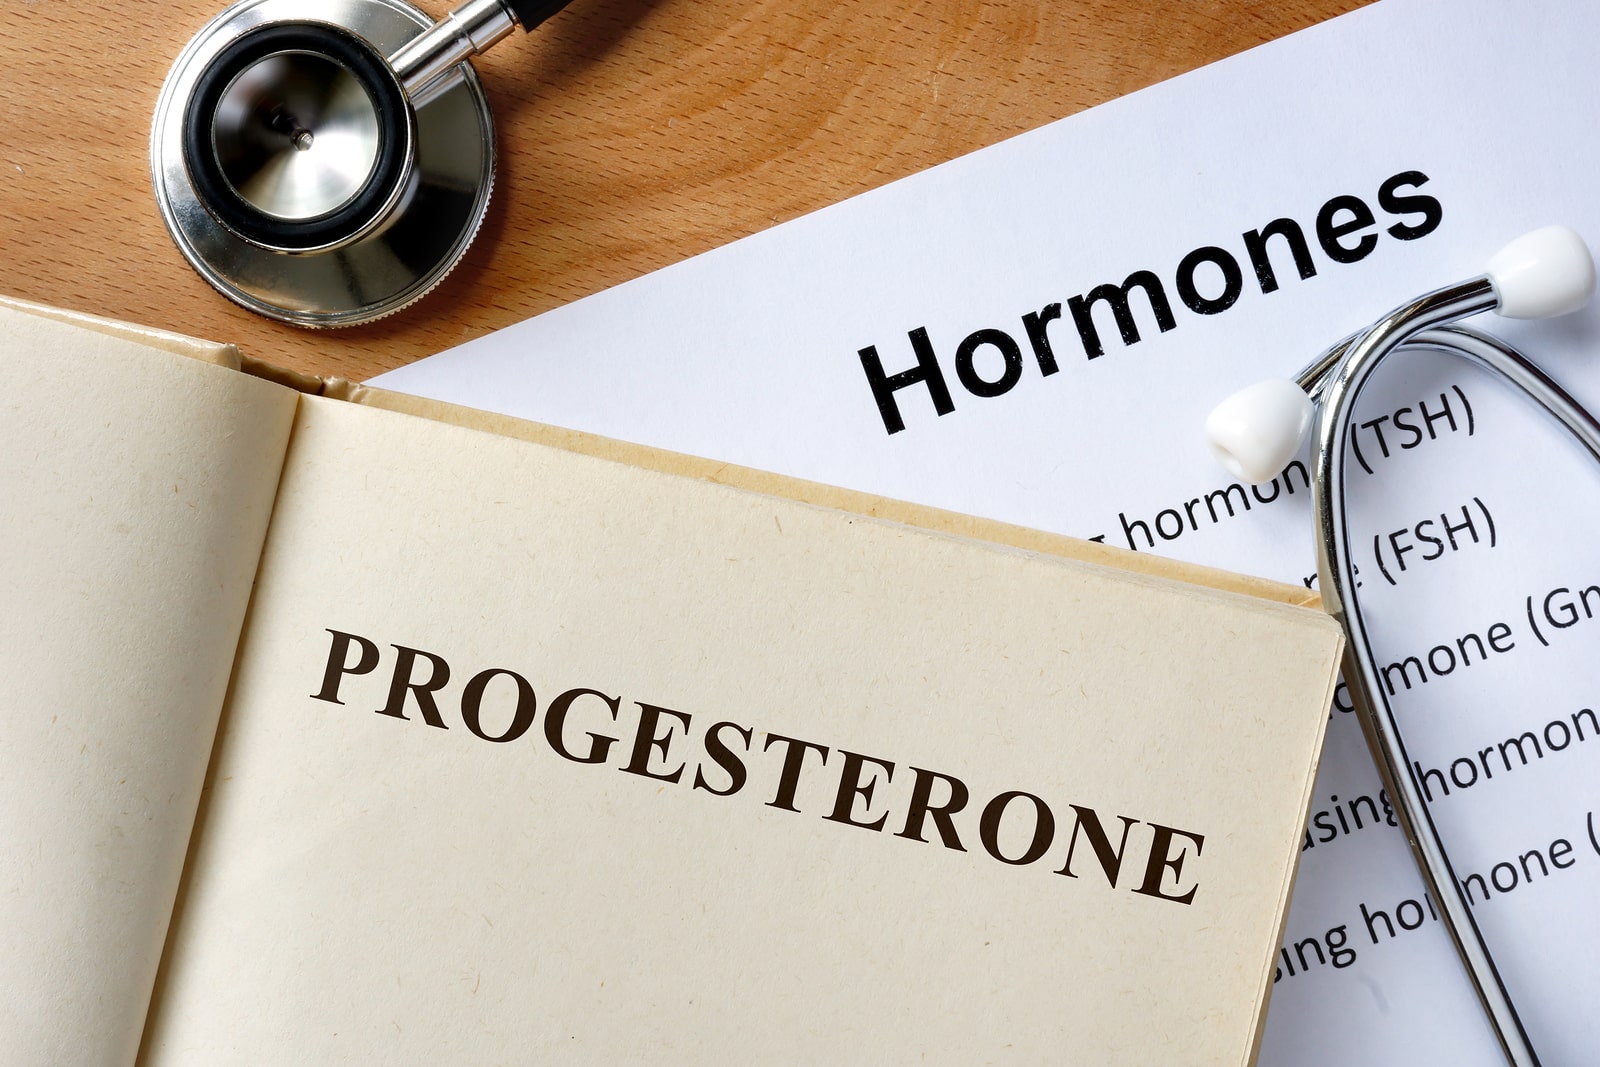 How to Increase Progesterone